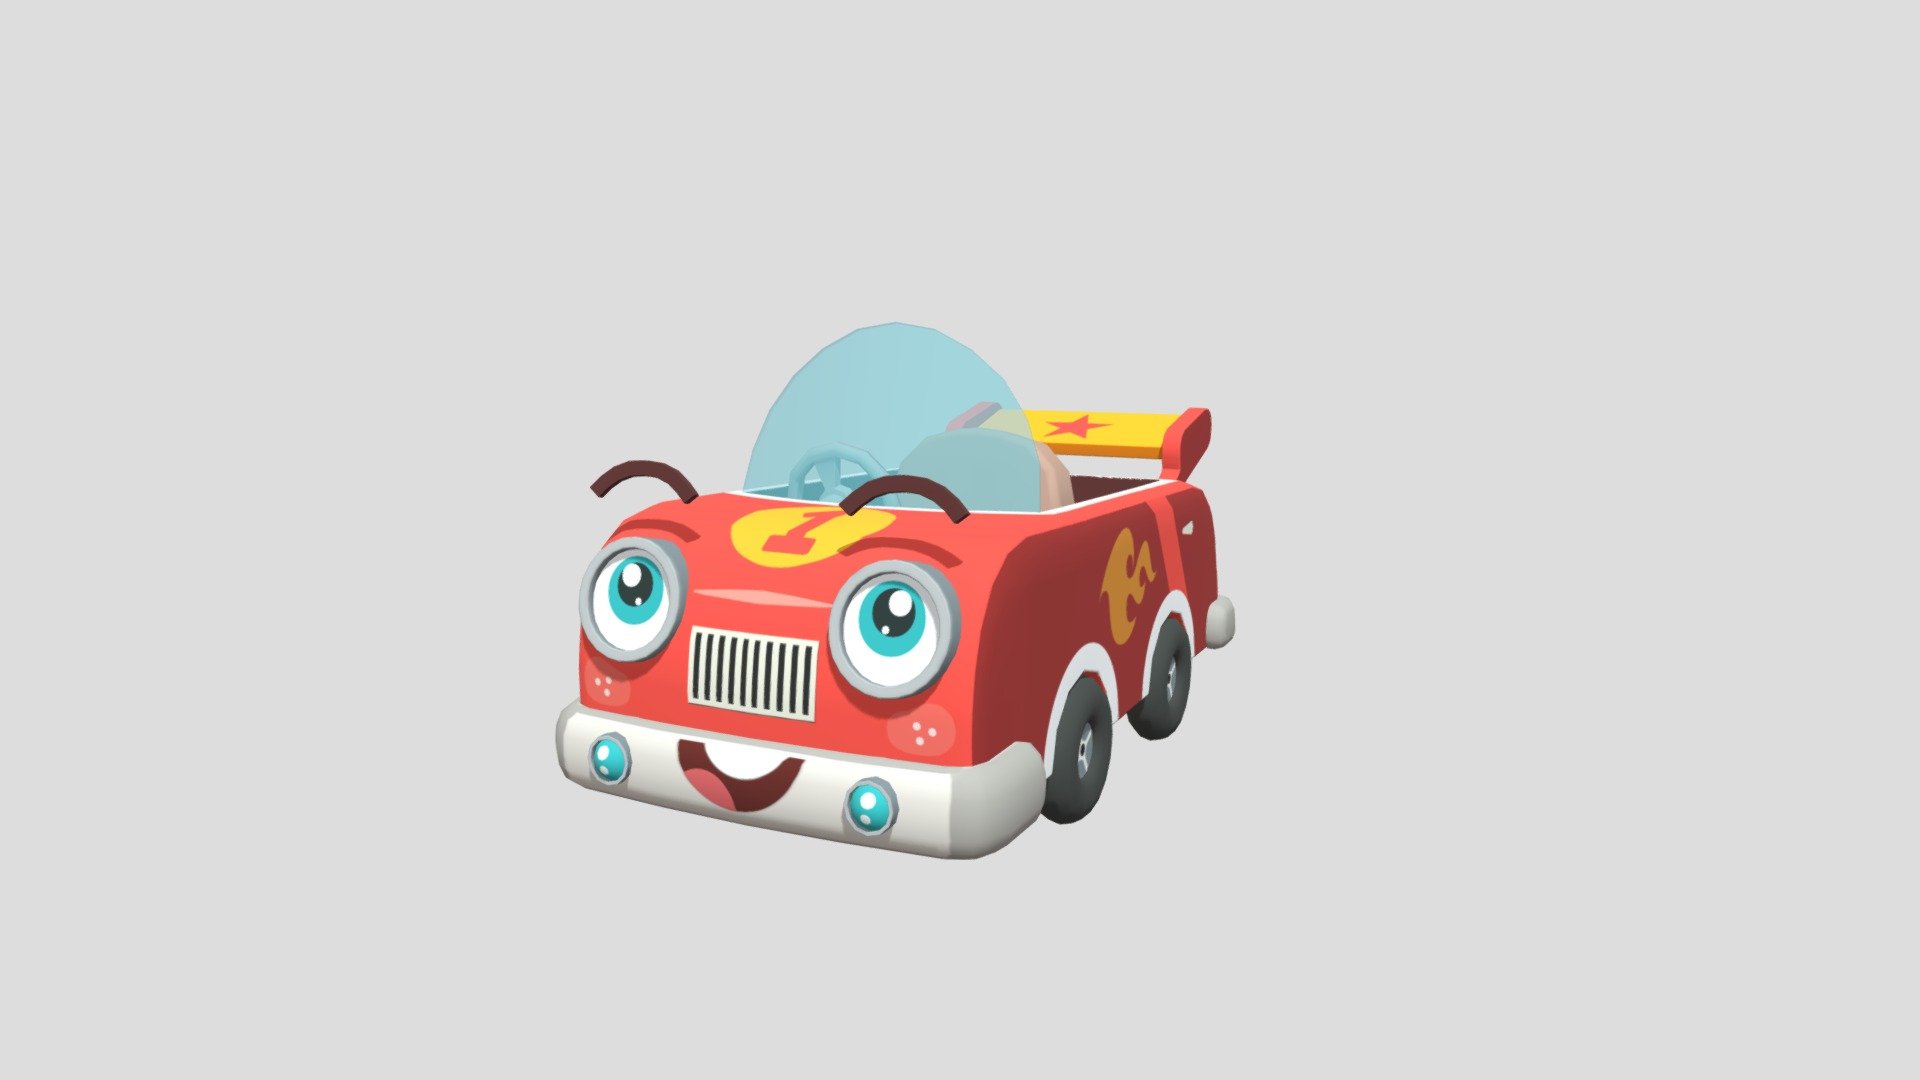 Its the perfect toy car for you all to use. This car can be used in games 3d model